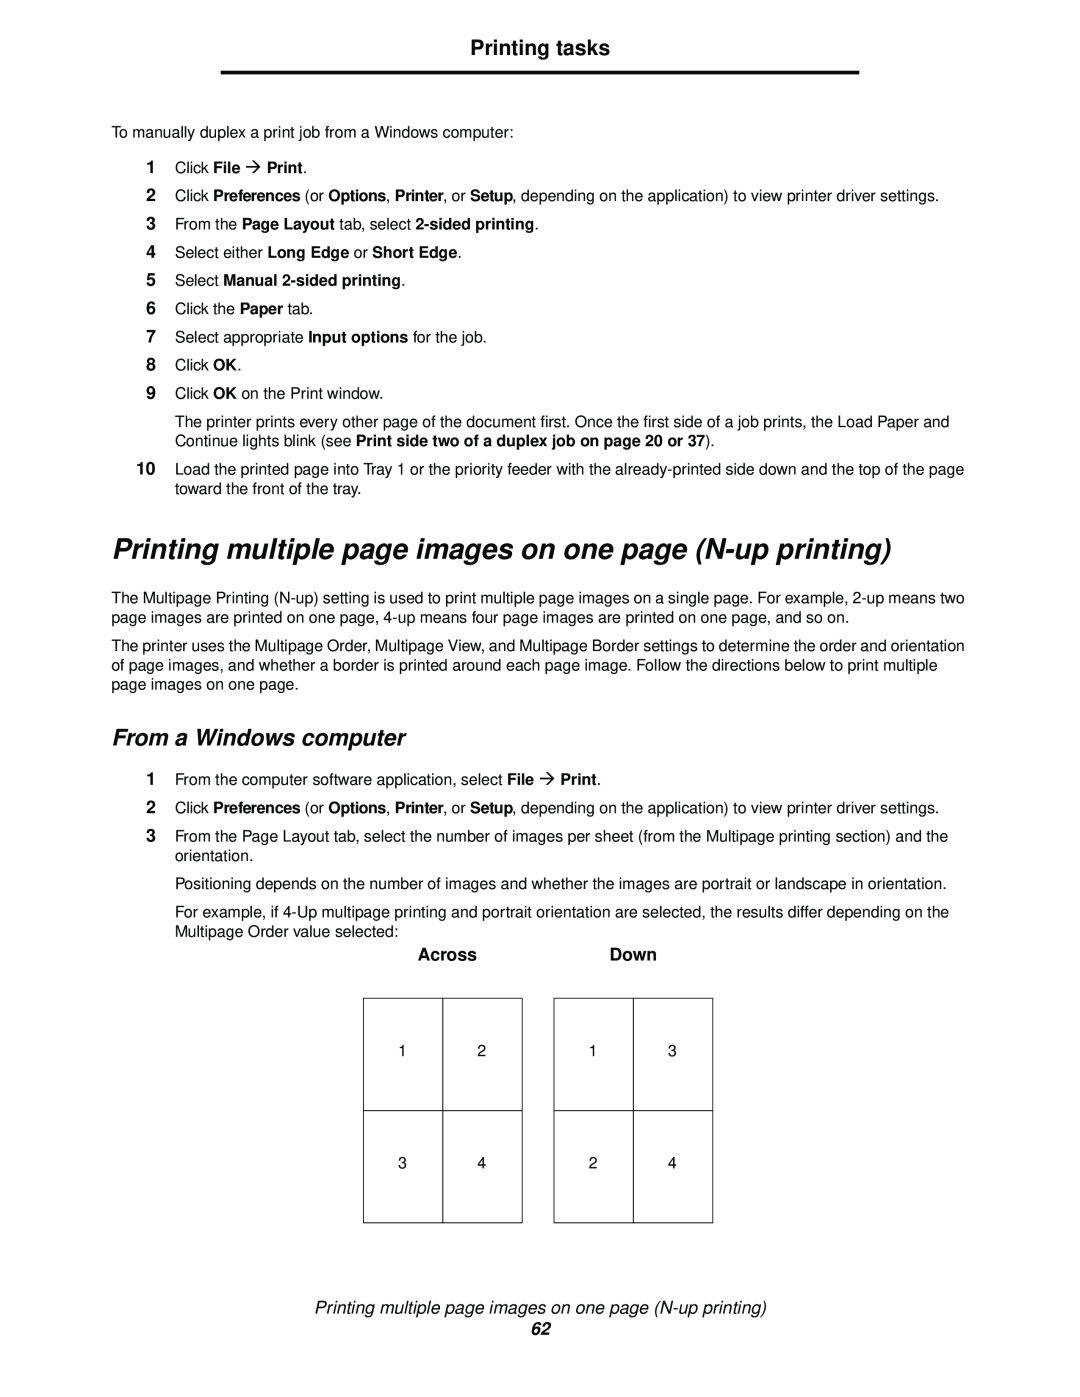 Lexmark 120 Printing multiple page images on one page N-up printing, AcrossDown, Select either Long Edge or Short Edge 